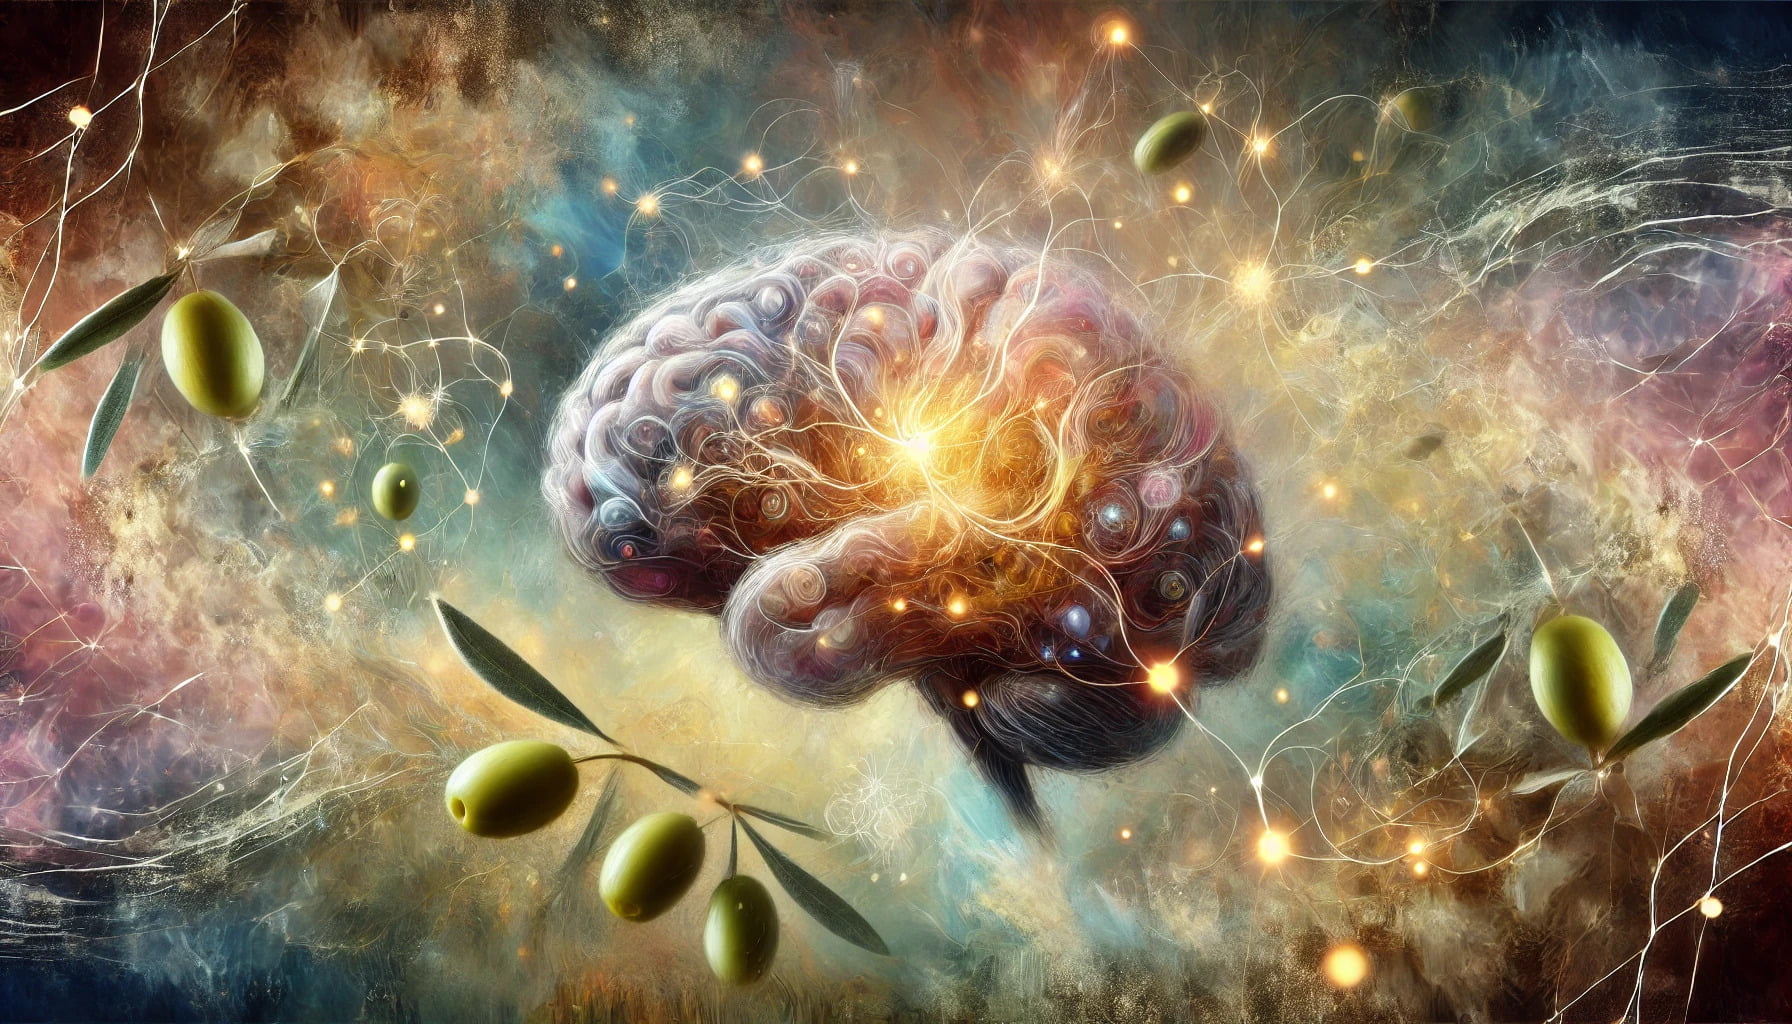 An artistic interpretation of a brain featuring its neural connections enhanced by olive oil, including olives and the oil.